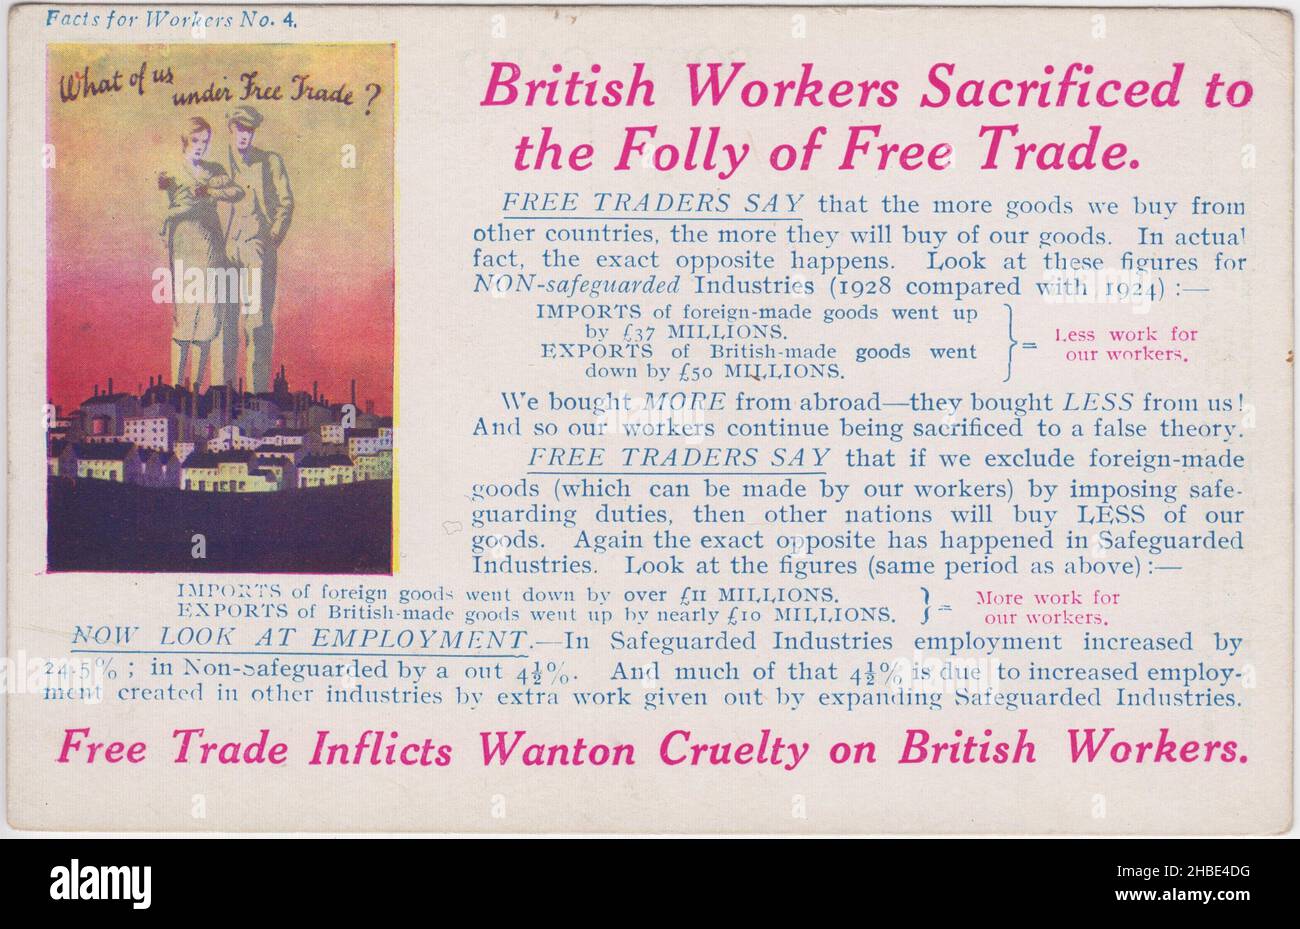 'British Workers Sacrificed to the Folly of Free Trade'... 'Free Trade Inflicts Wanton Cruelty on British Workers.' Postcard issued by the National Union of Conservative & Unionist Associations as part of their campaign for 'tariff reform' / protectionism. It combines statistics, slogans & a small poster image showing a working class man & woman asking 'What of us under Free Trade?' Stock Photo